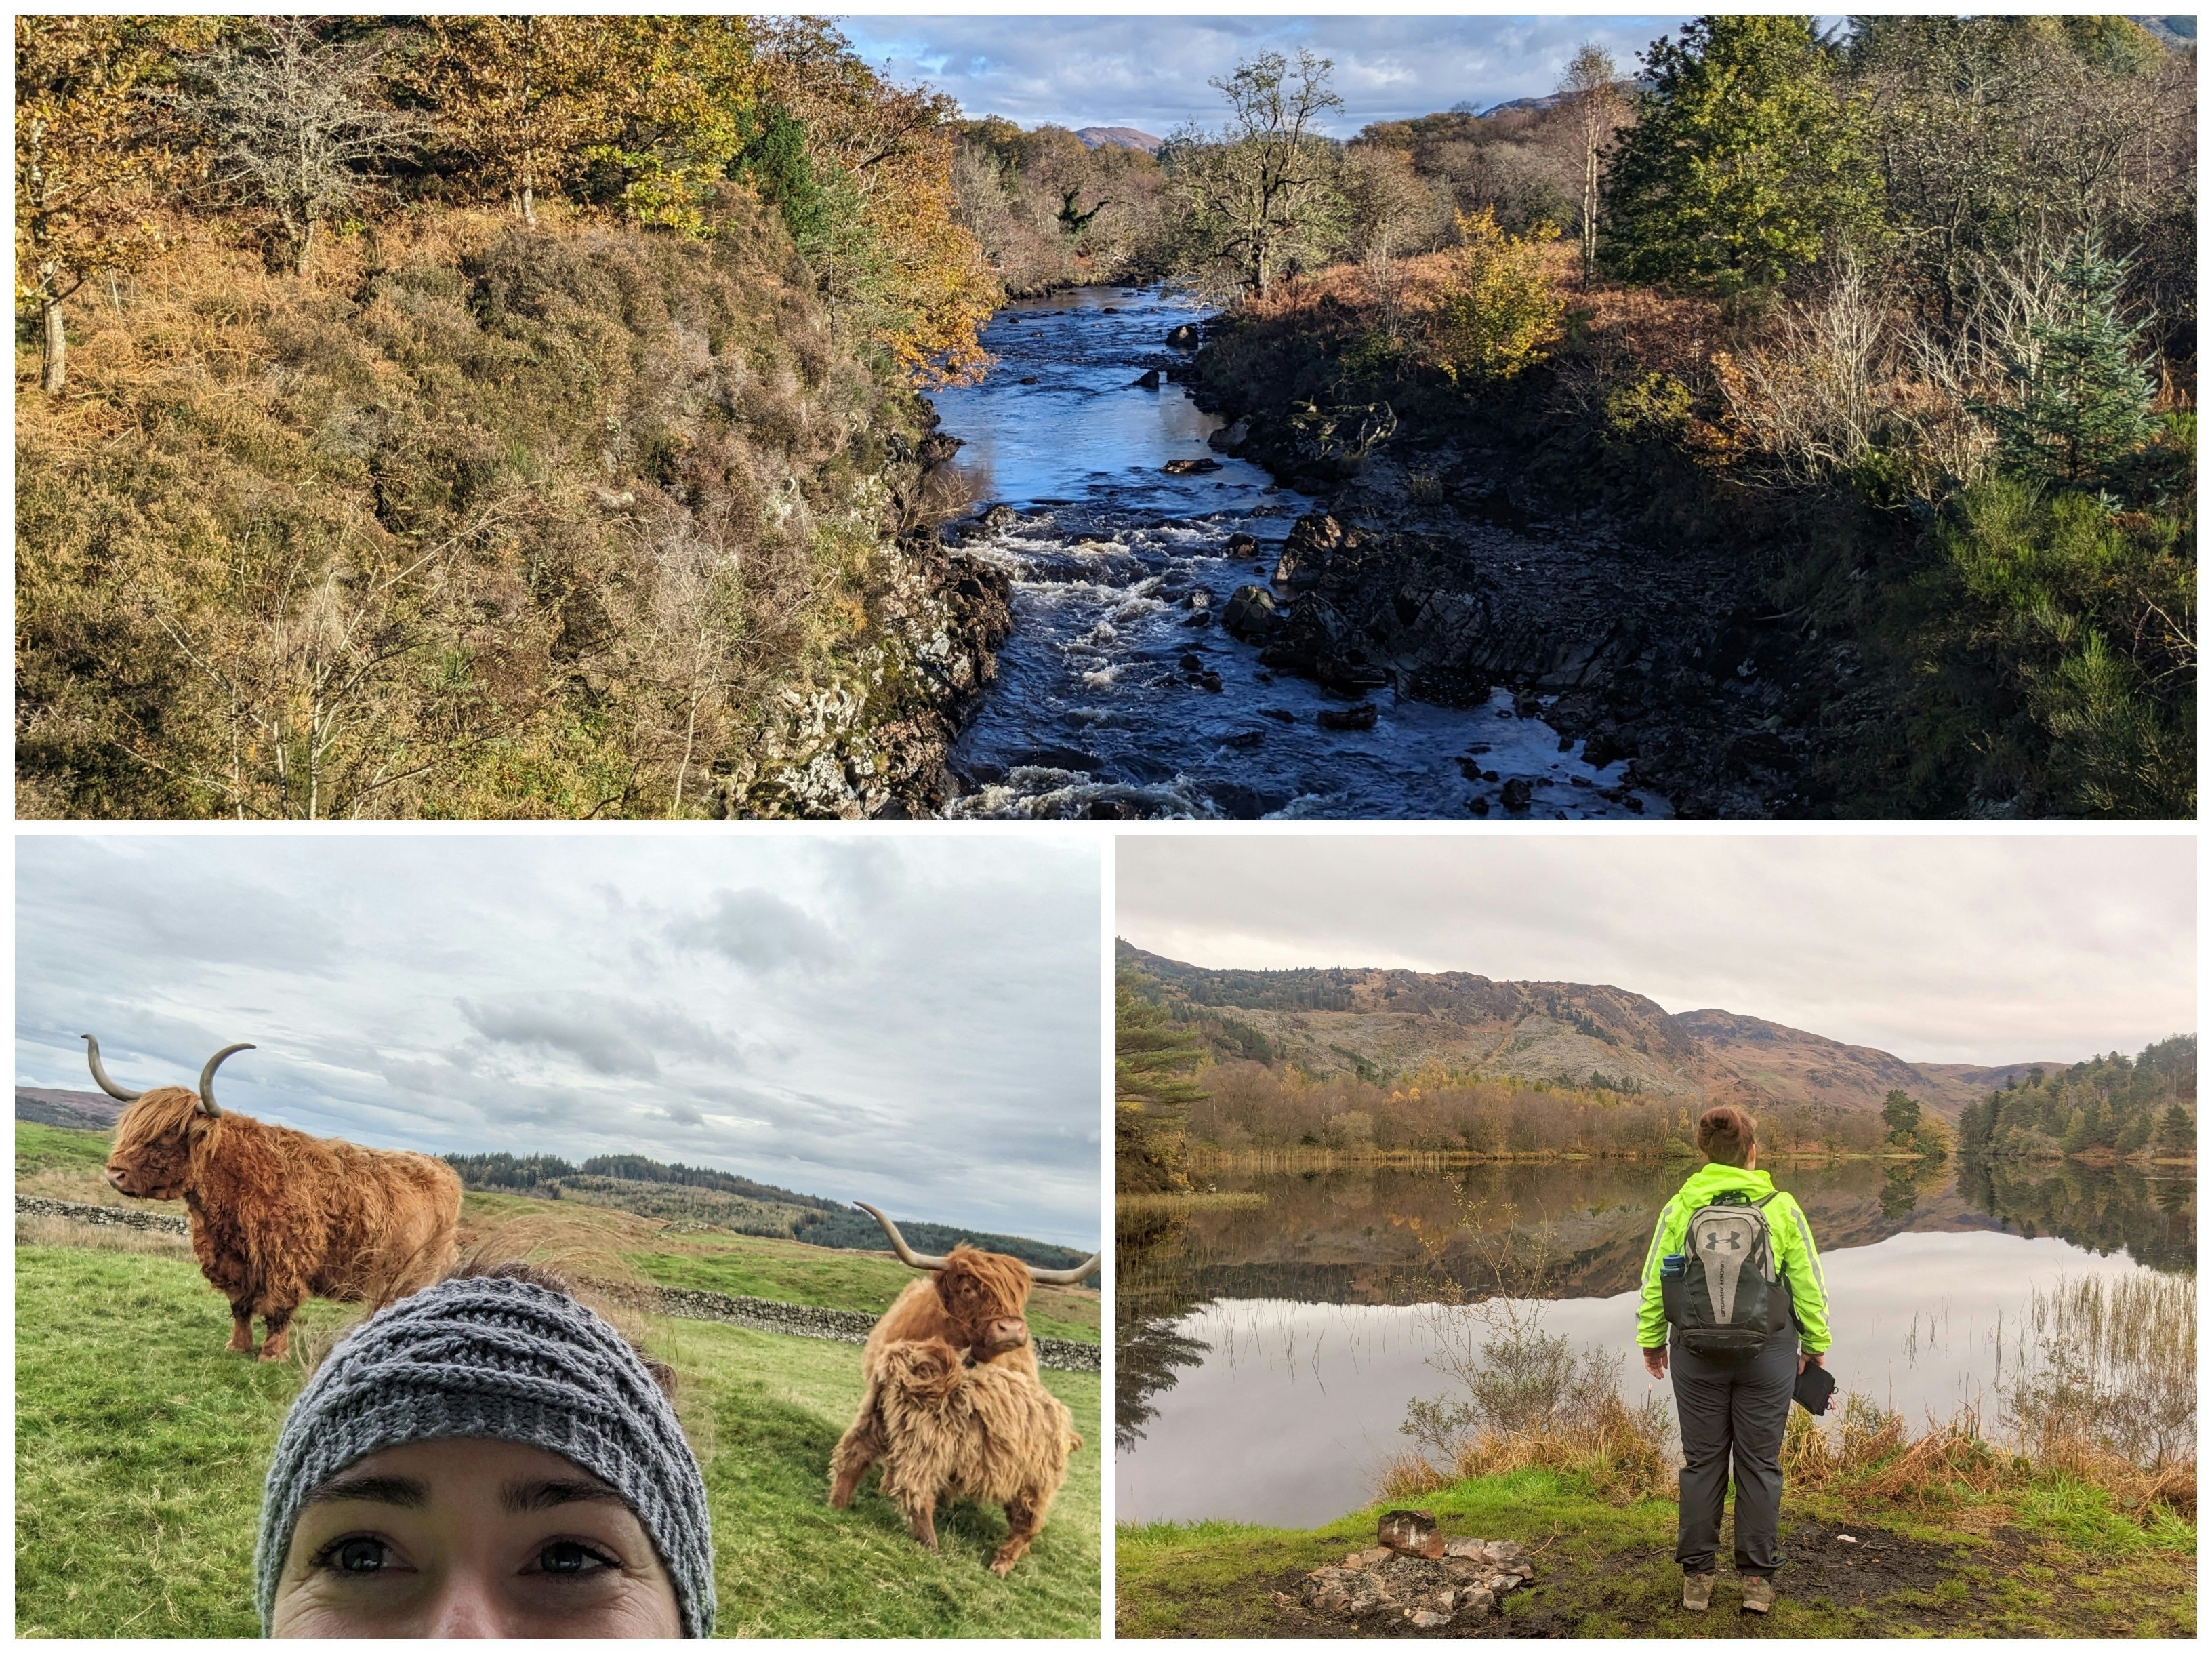 Amy in her high-vis hiking gear posing with alpacas and standing by the water on an autumn day in Dumfries and Galloway